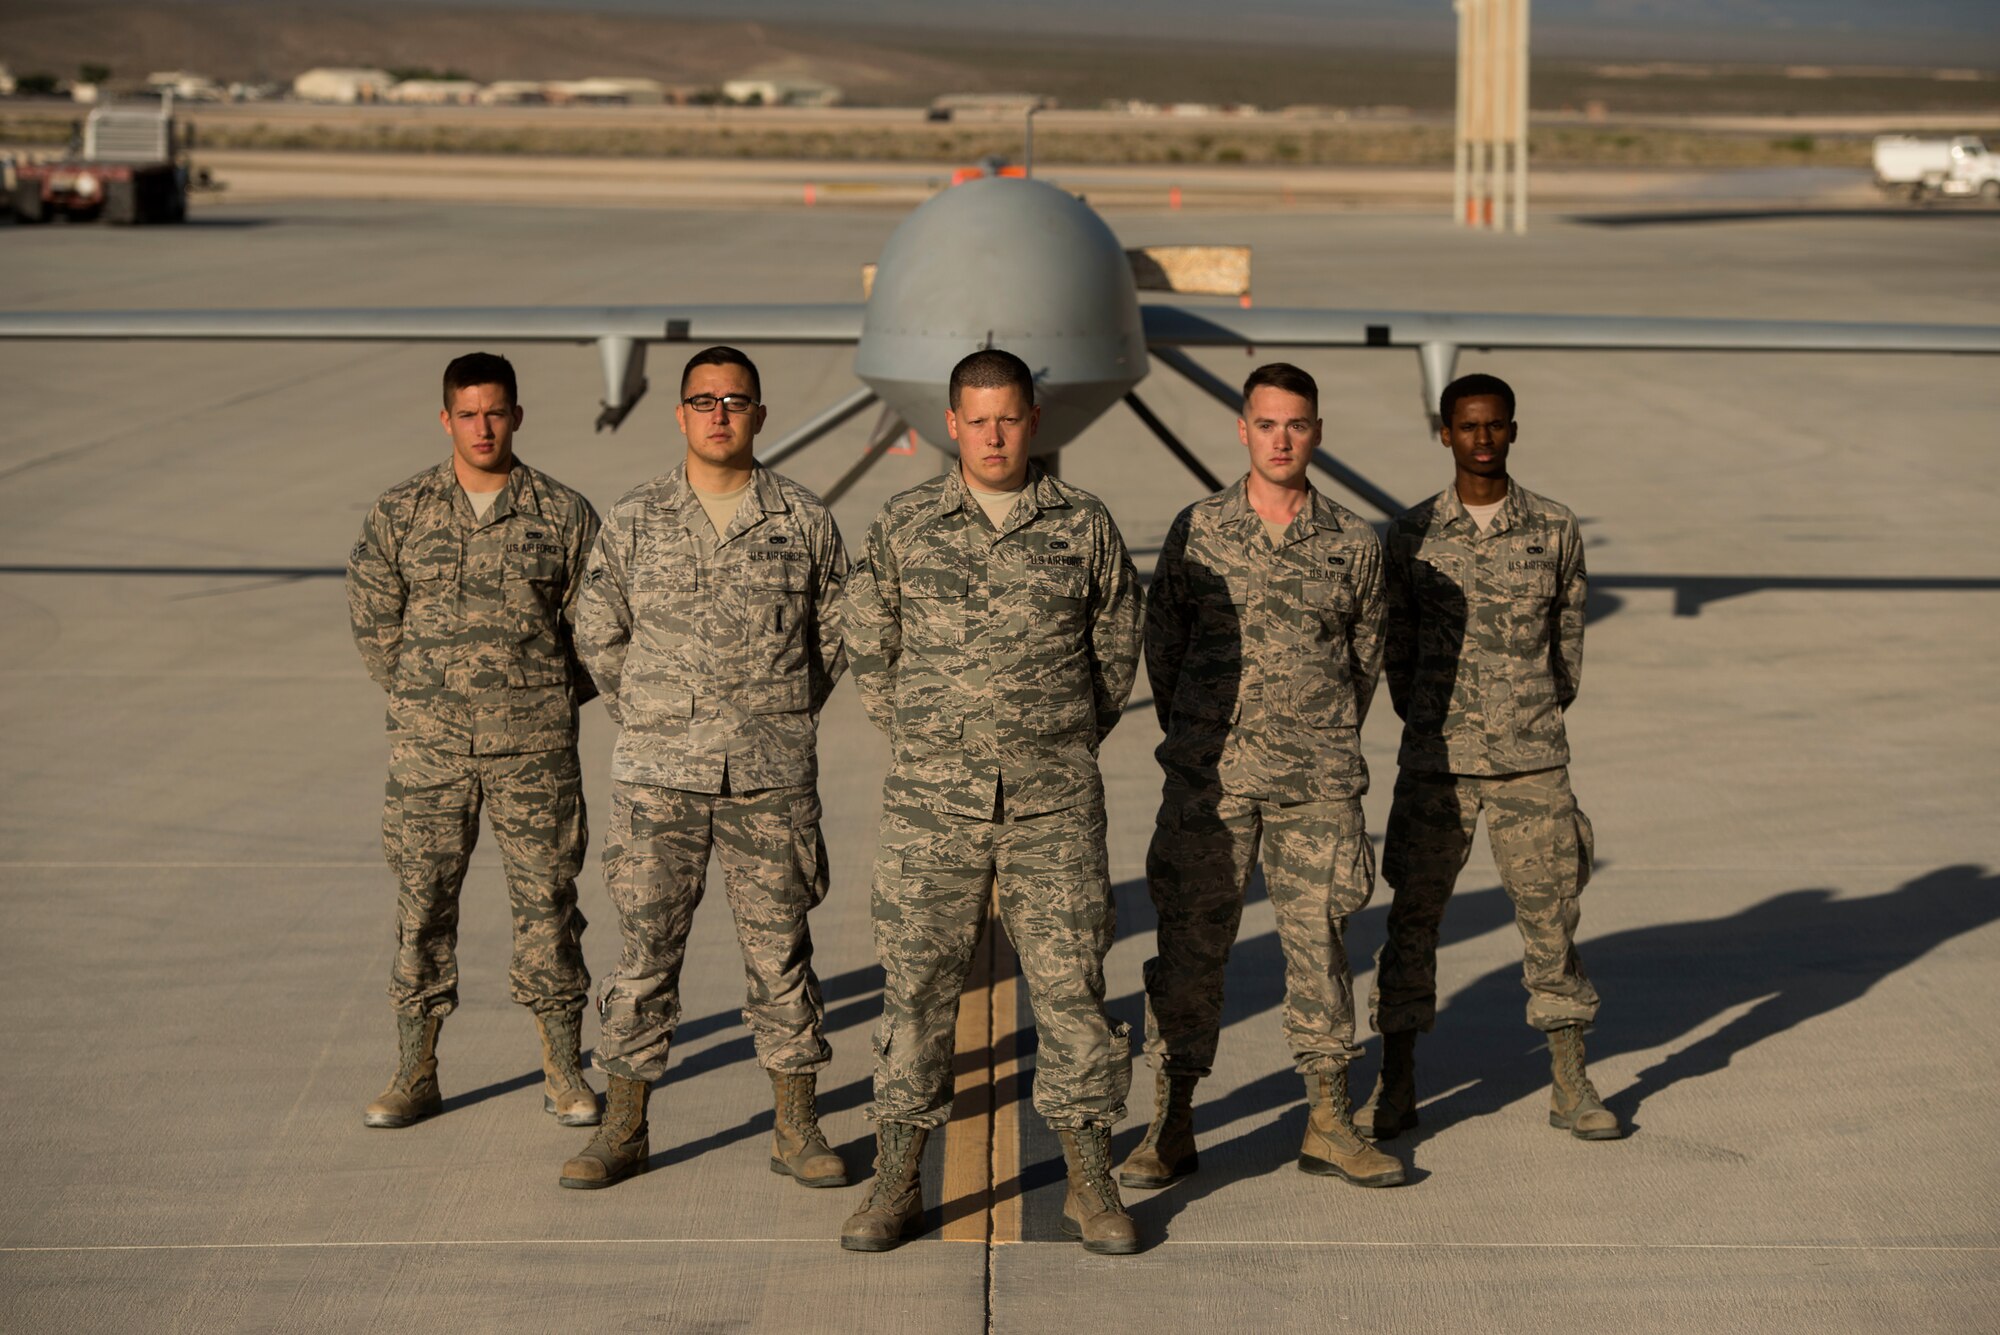 432nd Aircraft Maintenance Squadron maintainers stand in front of an MQ-1 Predator May, 5, 2015, at Creech 
Air Force Base, Nev. The Predator is an armed multi-role Remotely Piloted Aircraft supporting combatant commander's downrange with persistent attack and reconnaissance capabilities. (U.S. Air Force photo by Tech. Sgt. Vernon Young Jr.)